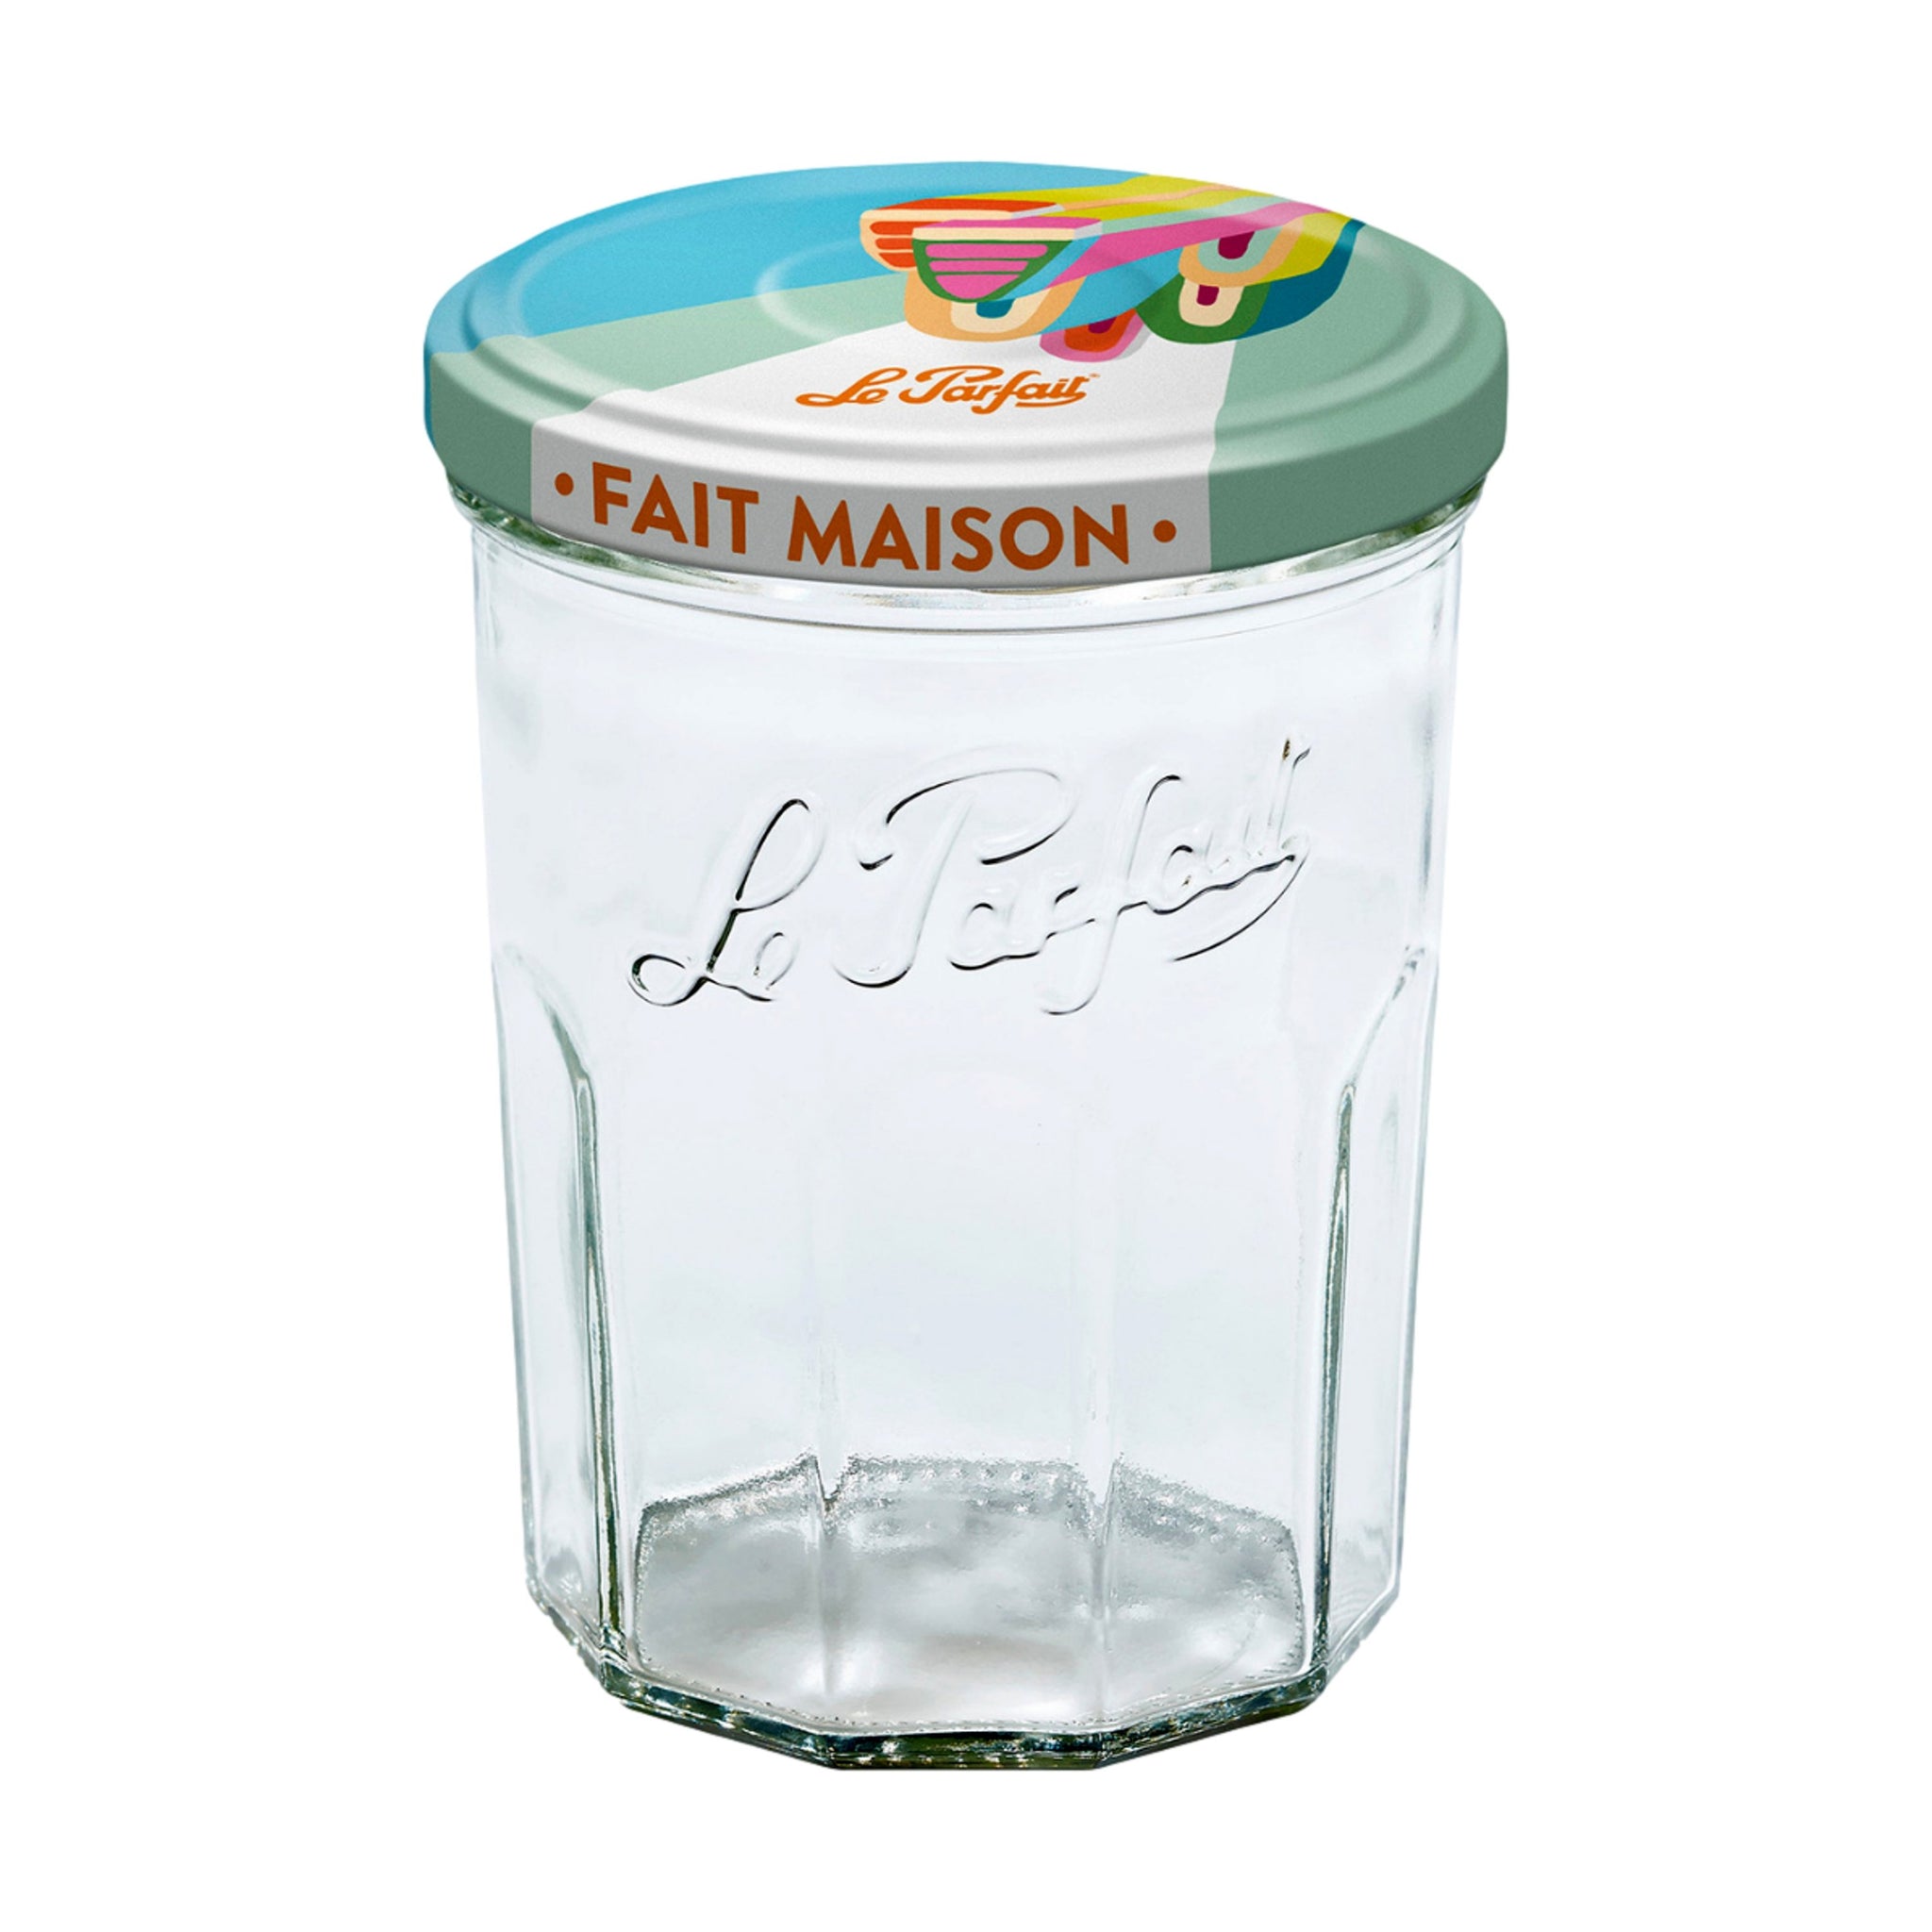 Le Parfait 6 Pack Jam Jar - 385ml Faceted French Glass Jelly Jar with Colorful Twist Lid, LPJJ0385